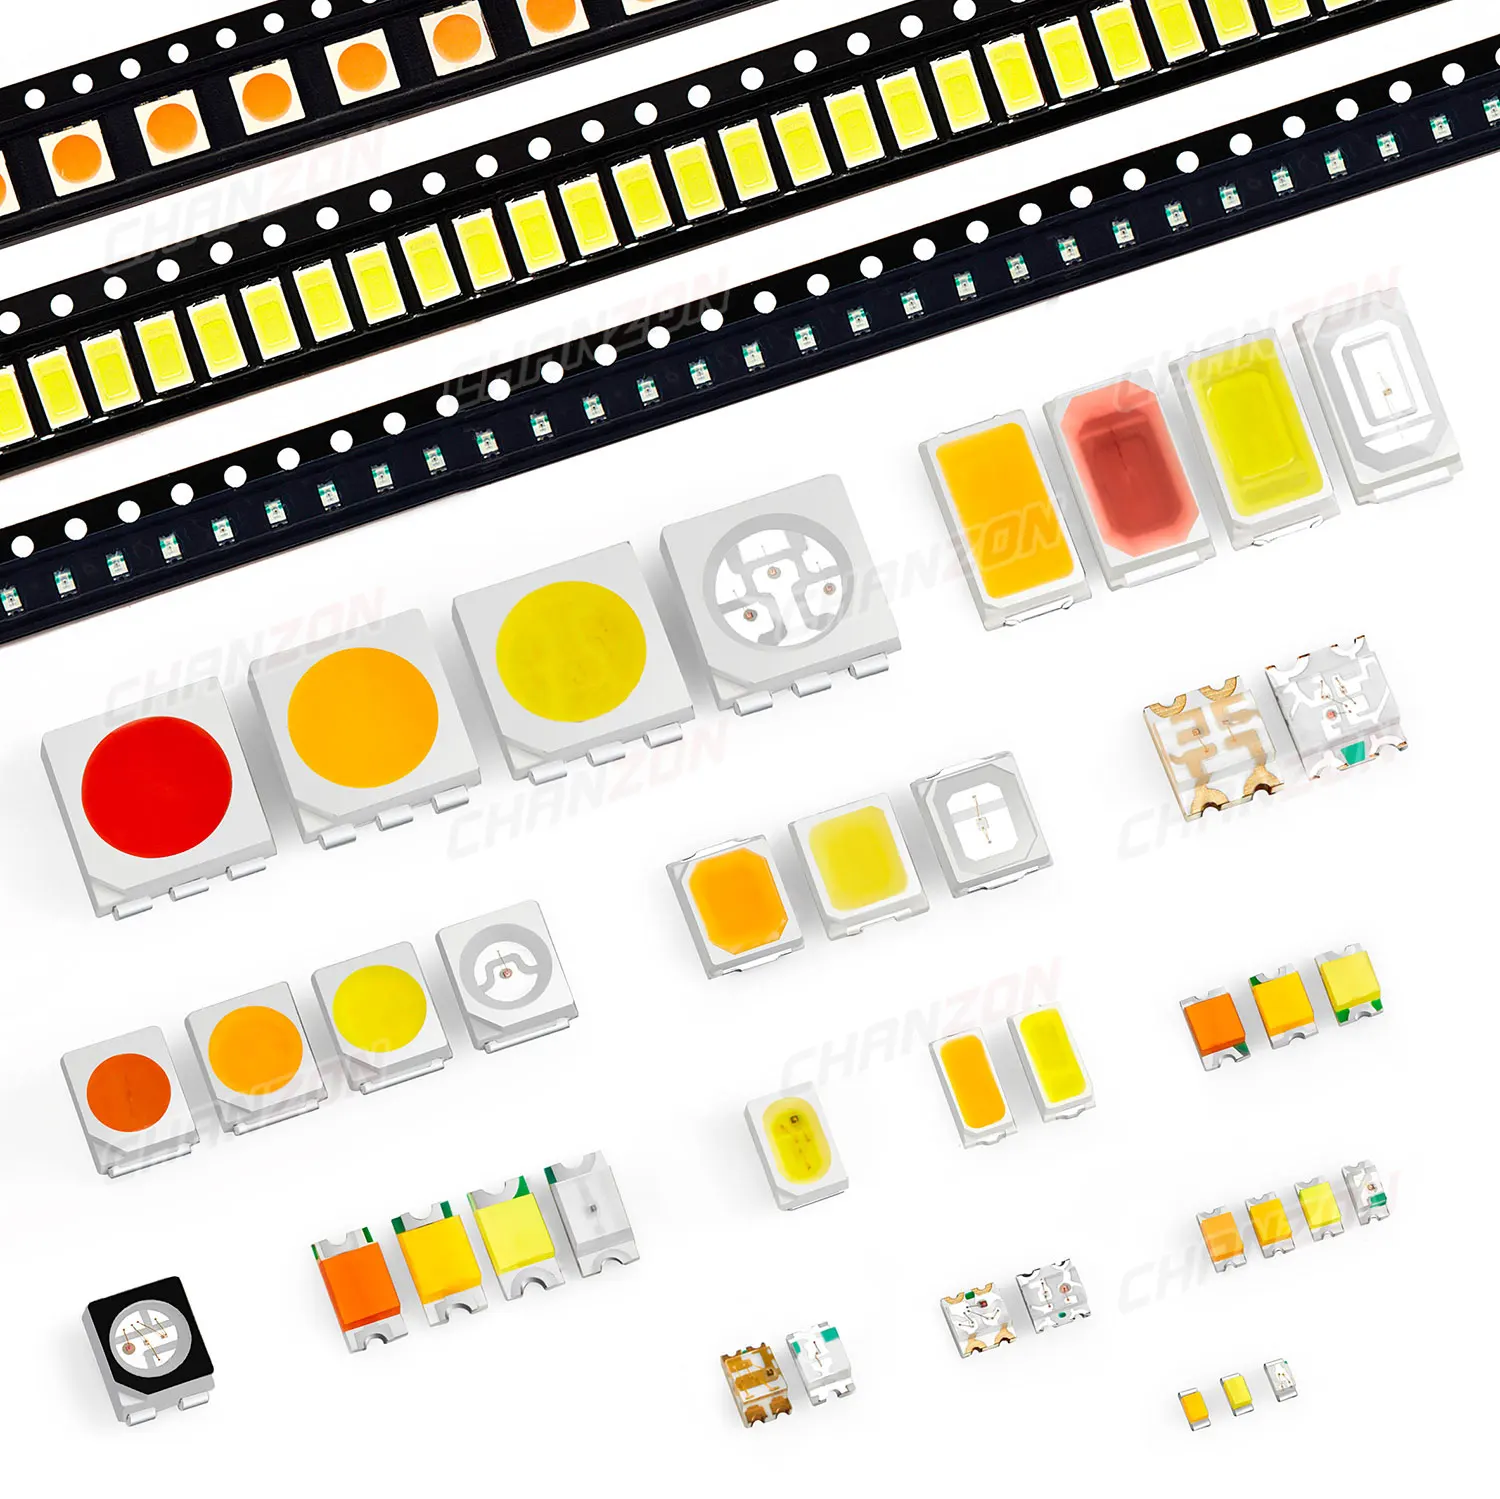 0603 (1608) SMD LED Emitting Diode Warm White Red Yellow Greed Blue Pink Orange Color Micro Light Beads Circuit Mini Lamp Chip